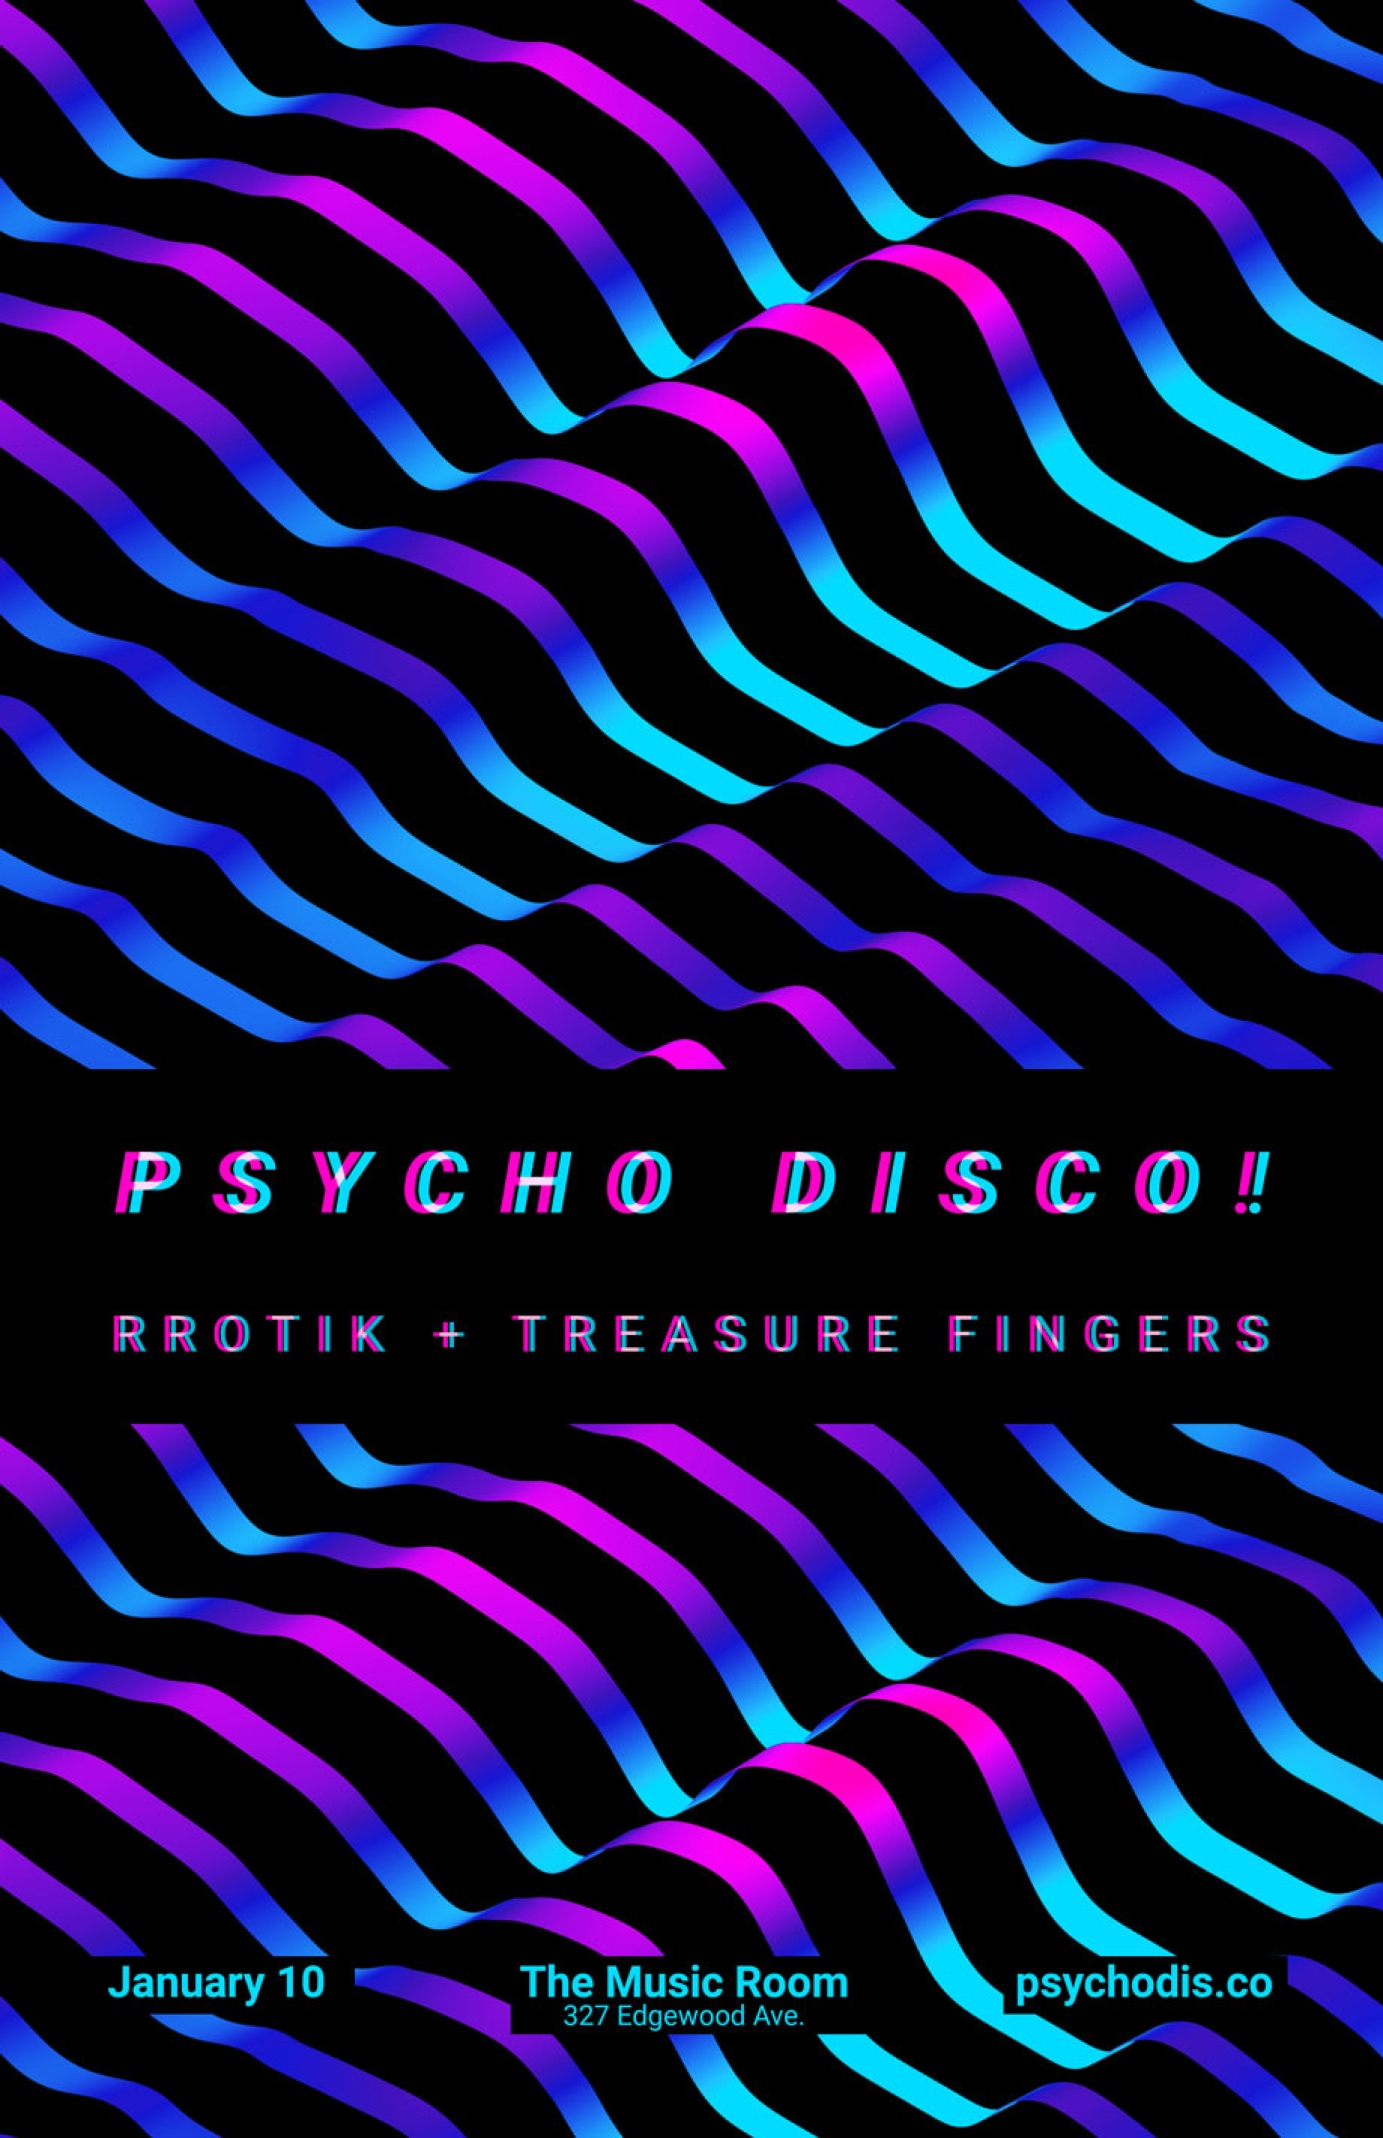 Psycho Disco! Event posters